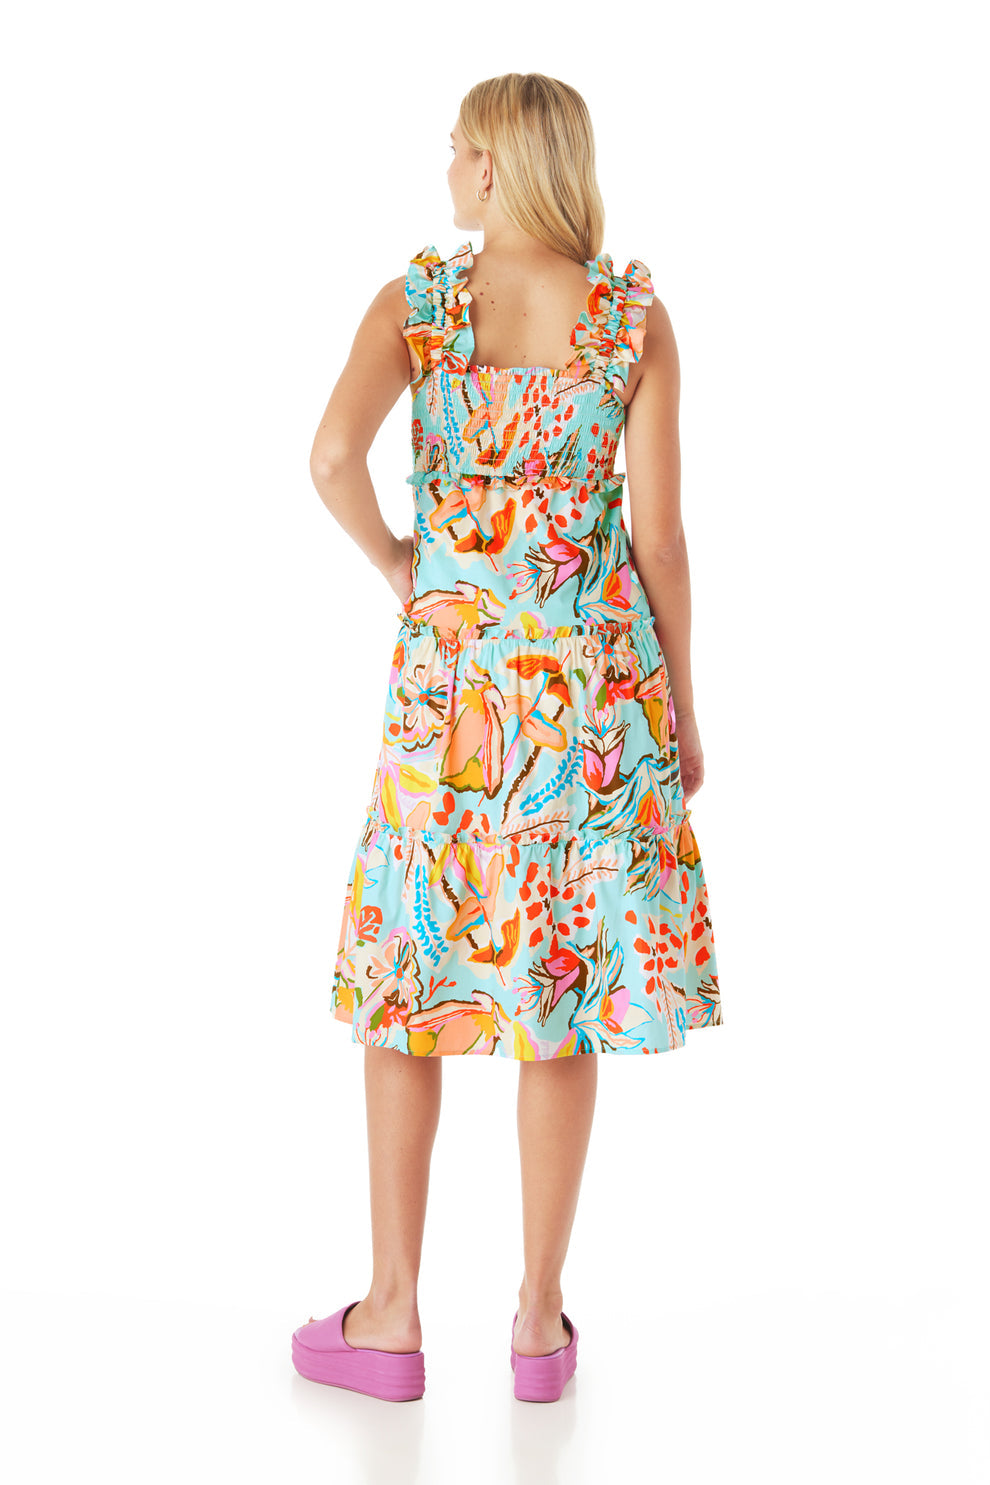 Brayden Dress in Canyon Floral by Crosby